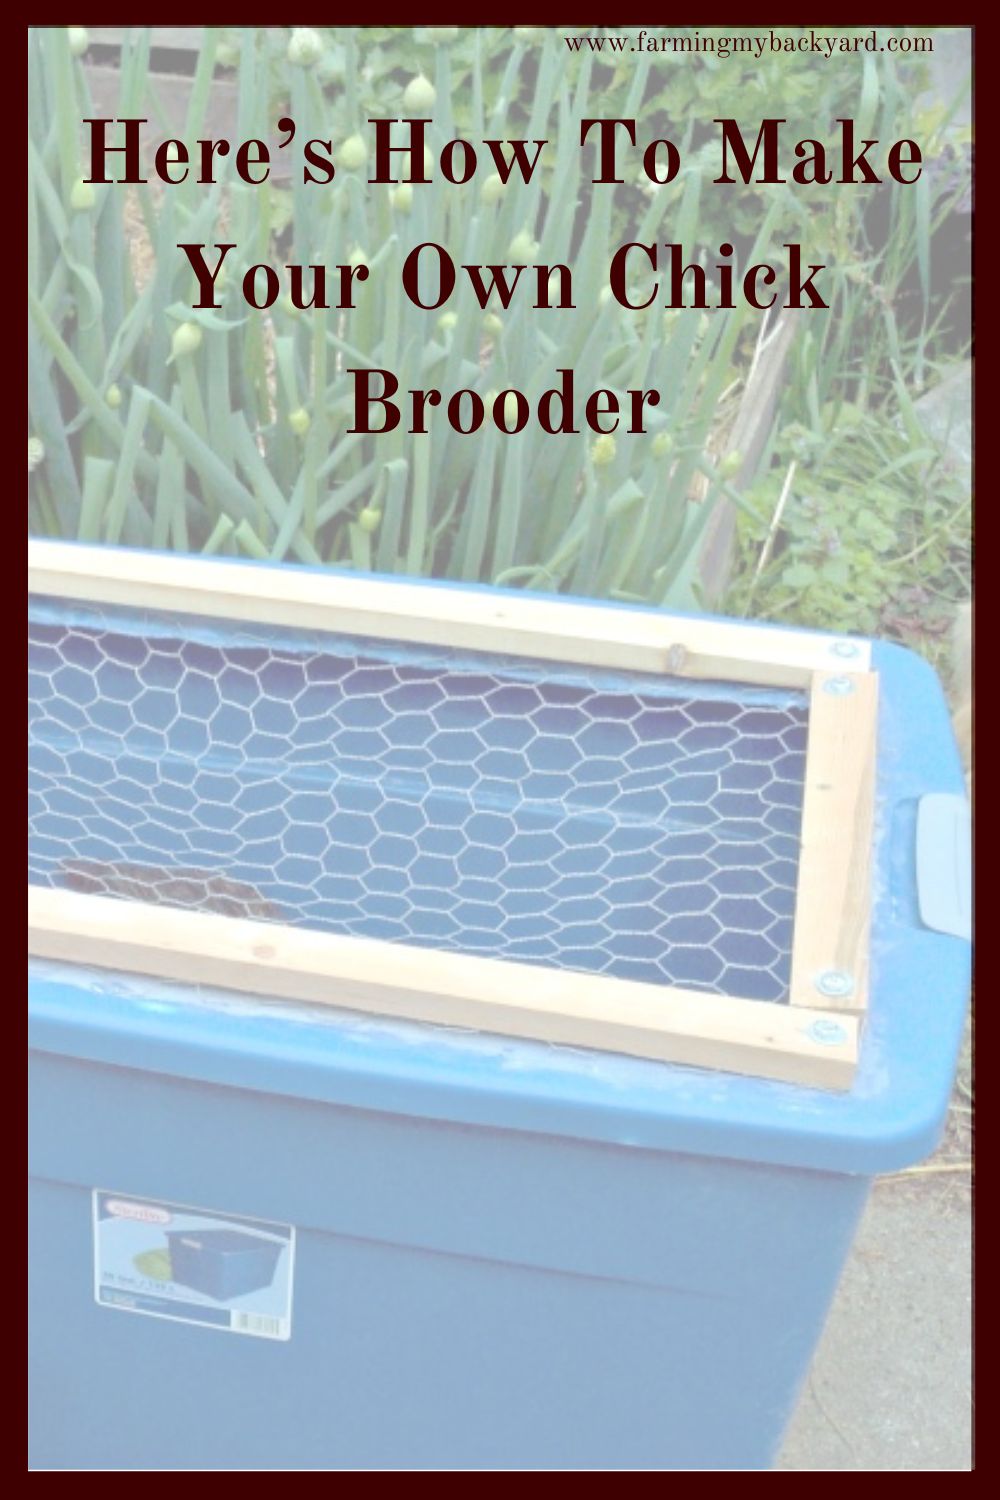 Here's how to make an easy DIY chick brooder box for a small backyard flock just by using chicken wire and a plastic tub.